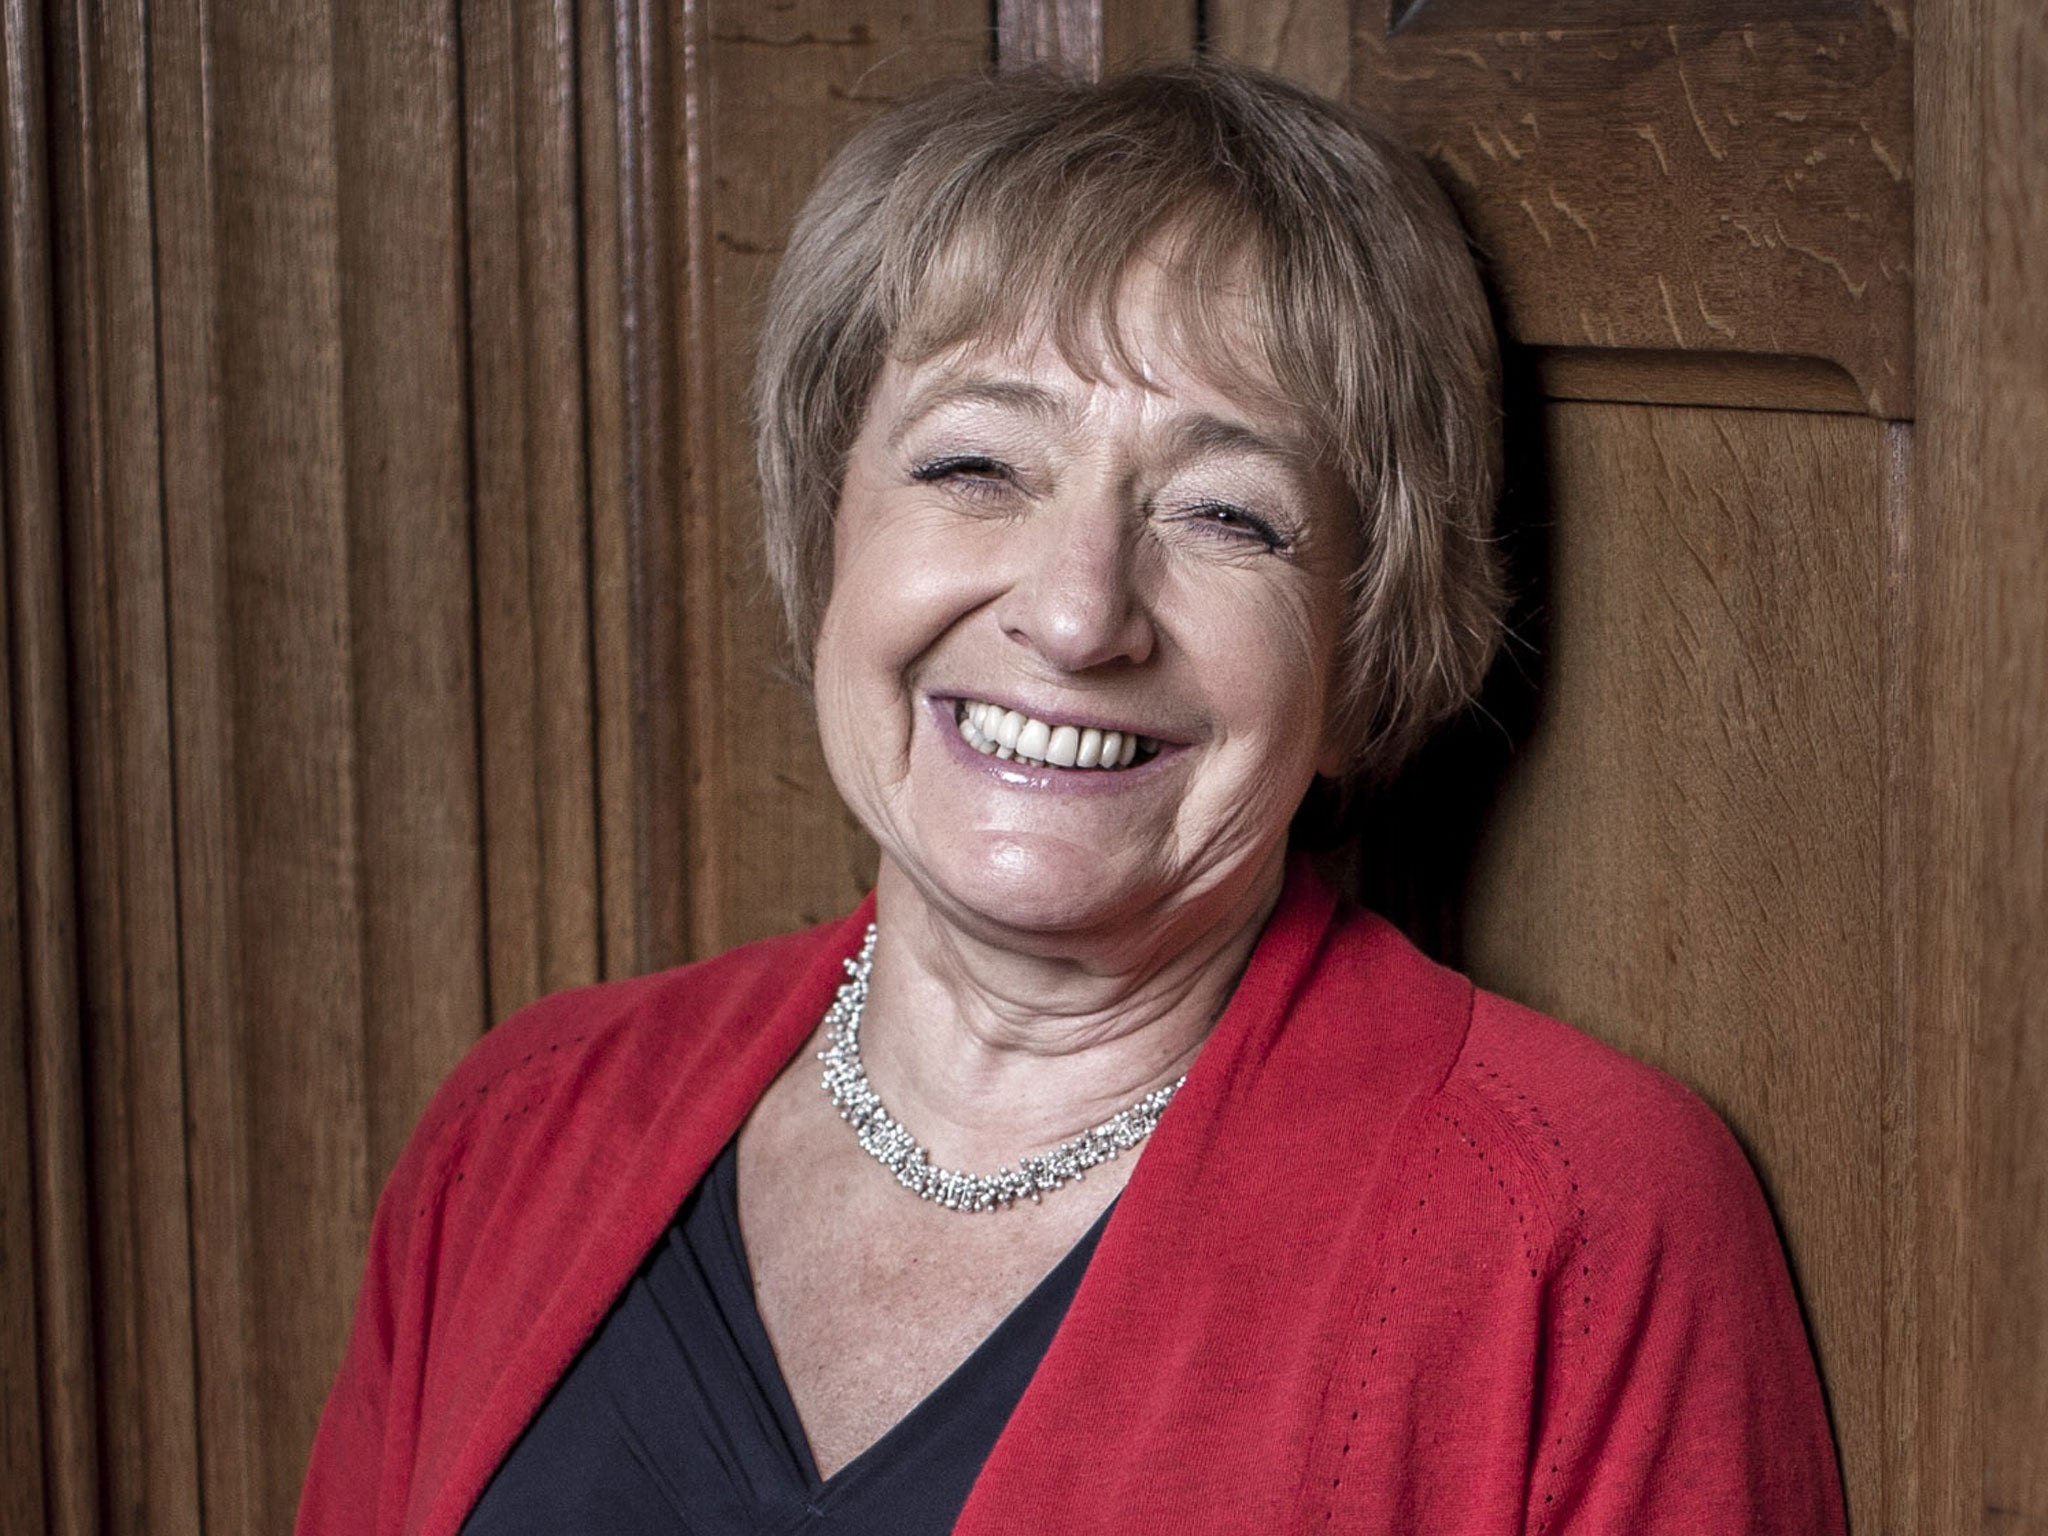 Margaret Hodge strikes fear into the hearts of the ' leaders' of dysfunctional public bodies